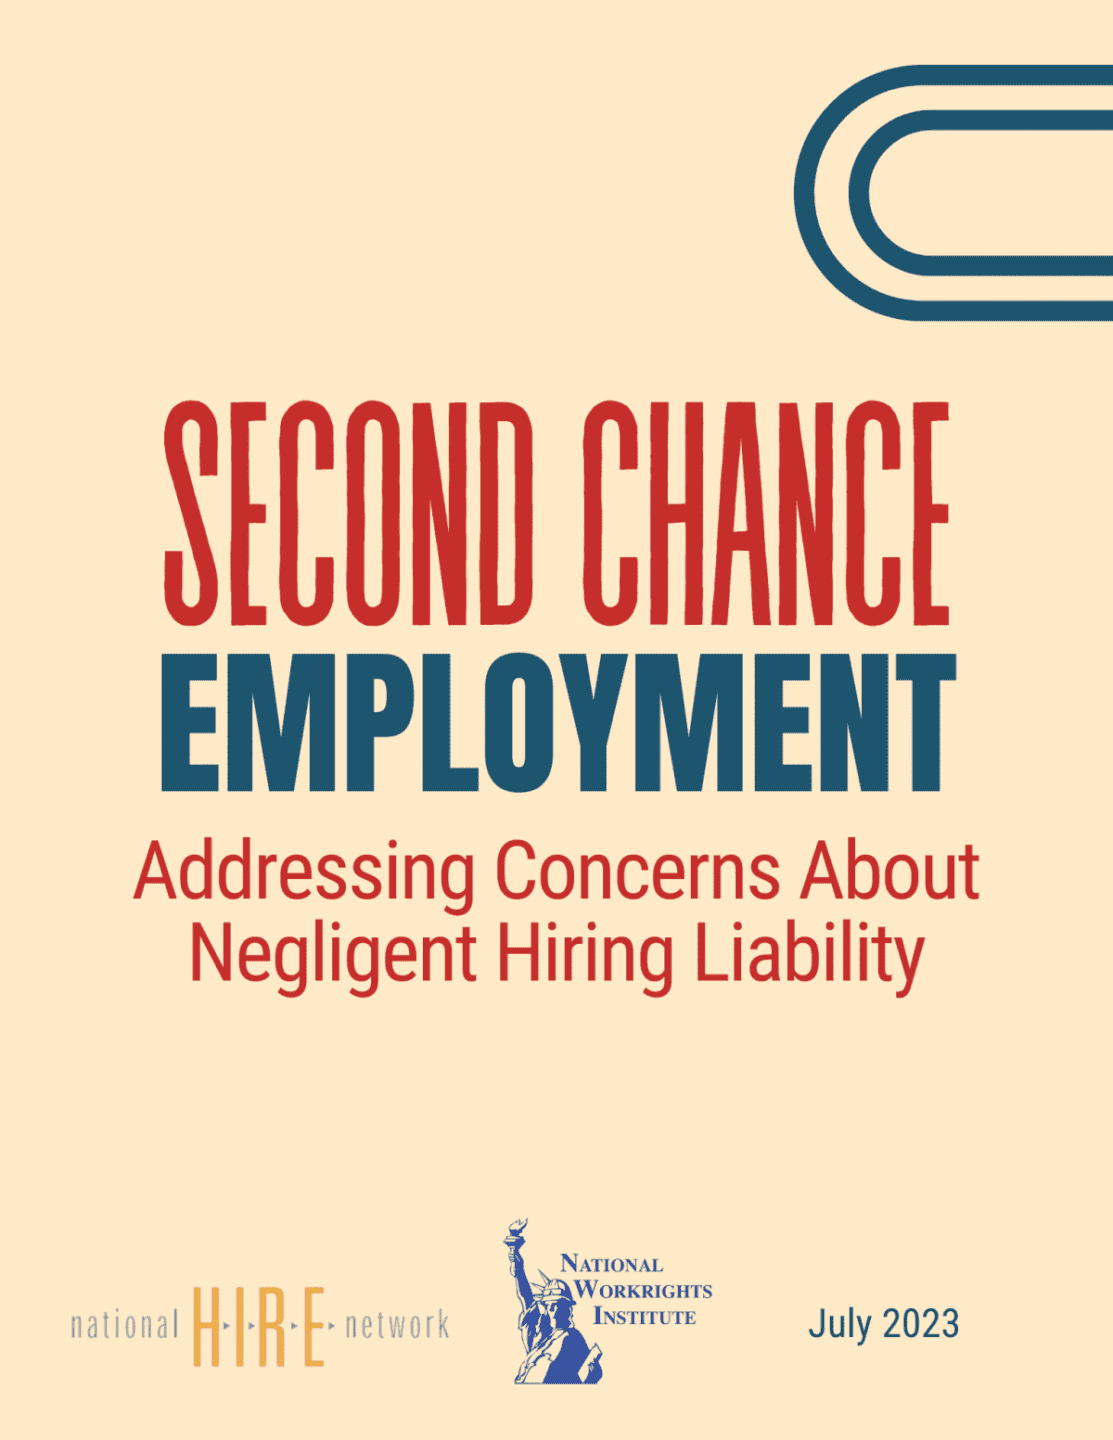 Second Chance Employment: Addressing Concerns About Negligent Hiring Liability